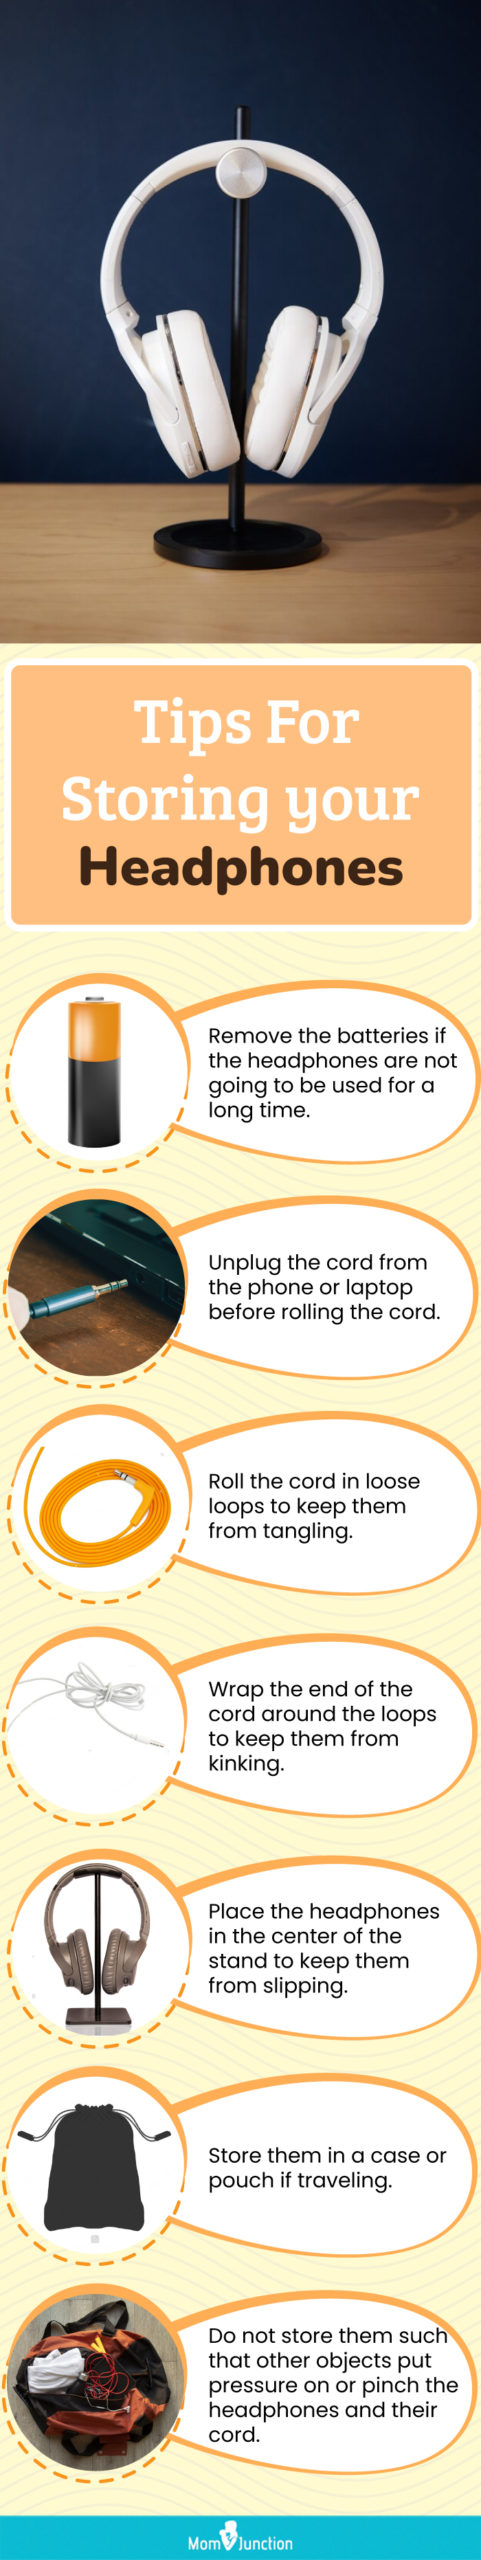 Tips For Storing Your Headphones (infographic)